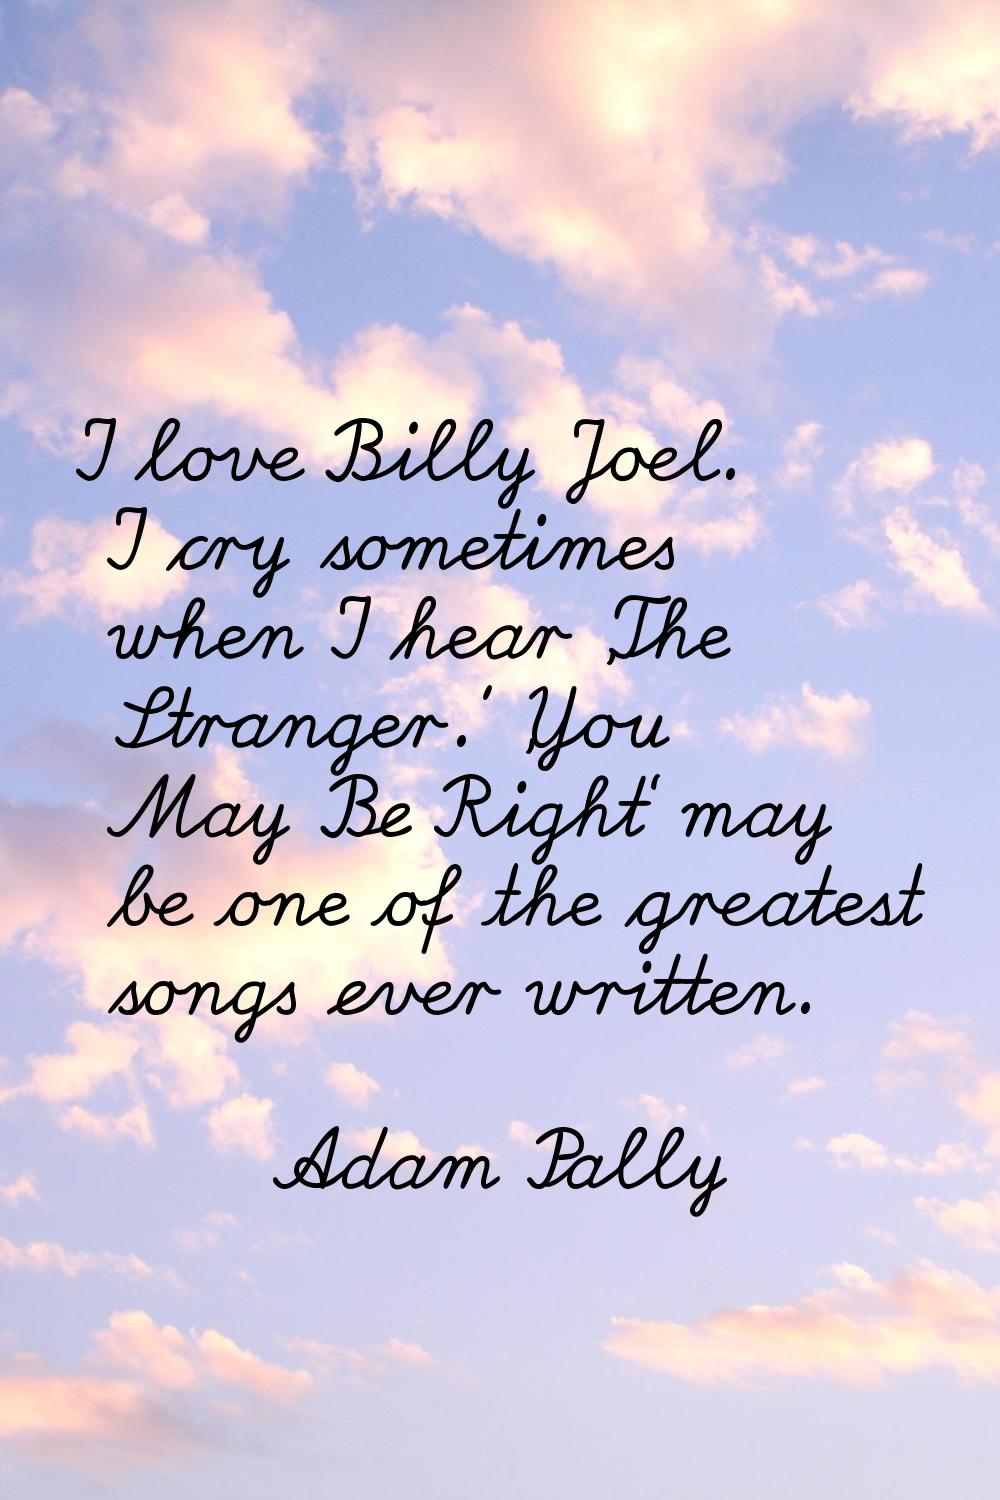 I love Billy Joel. I cry sometimes when I hear 'The Stranger.' 'You May Be Right' may be one of the